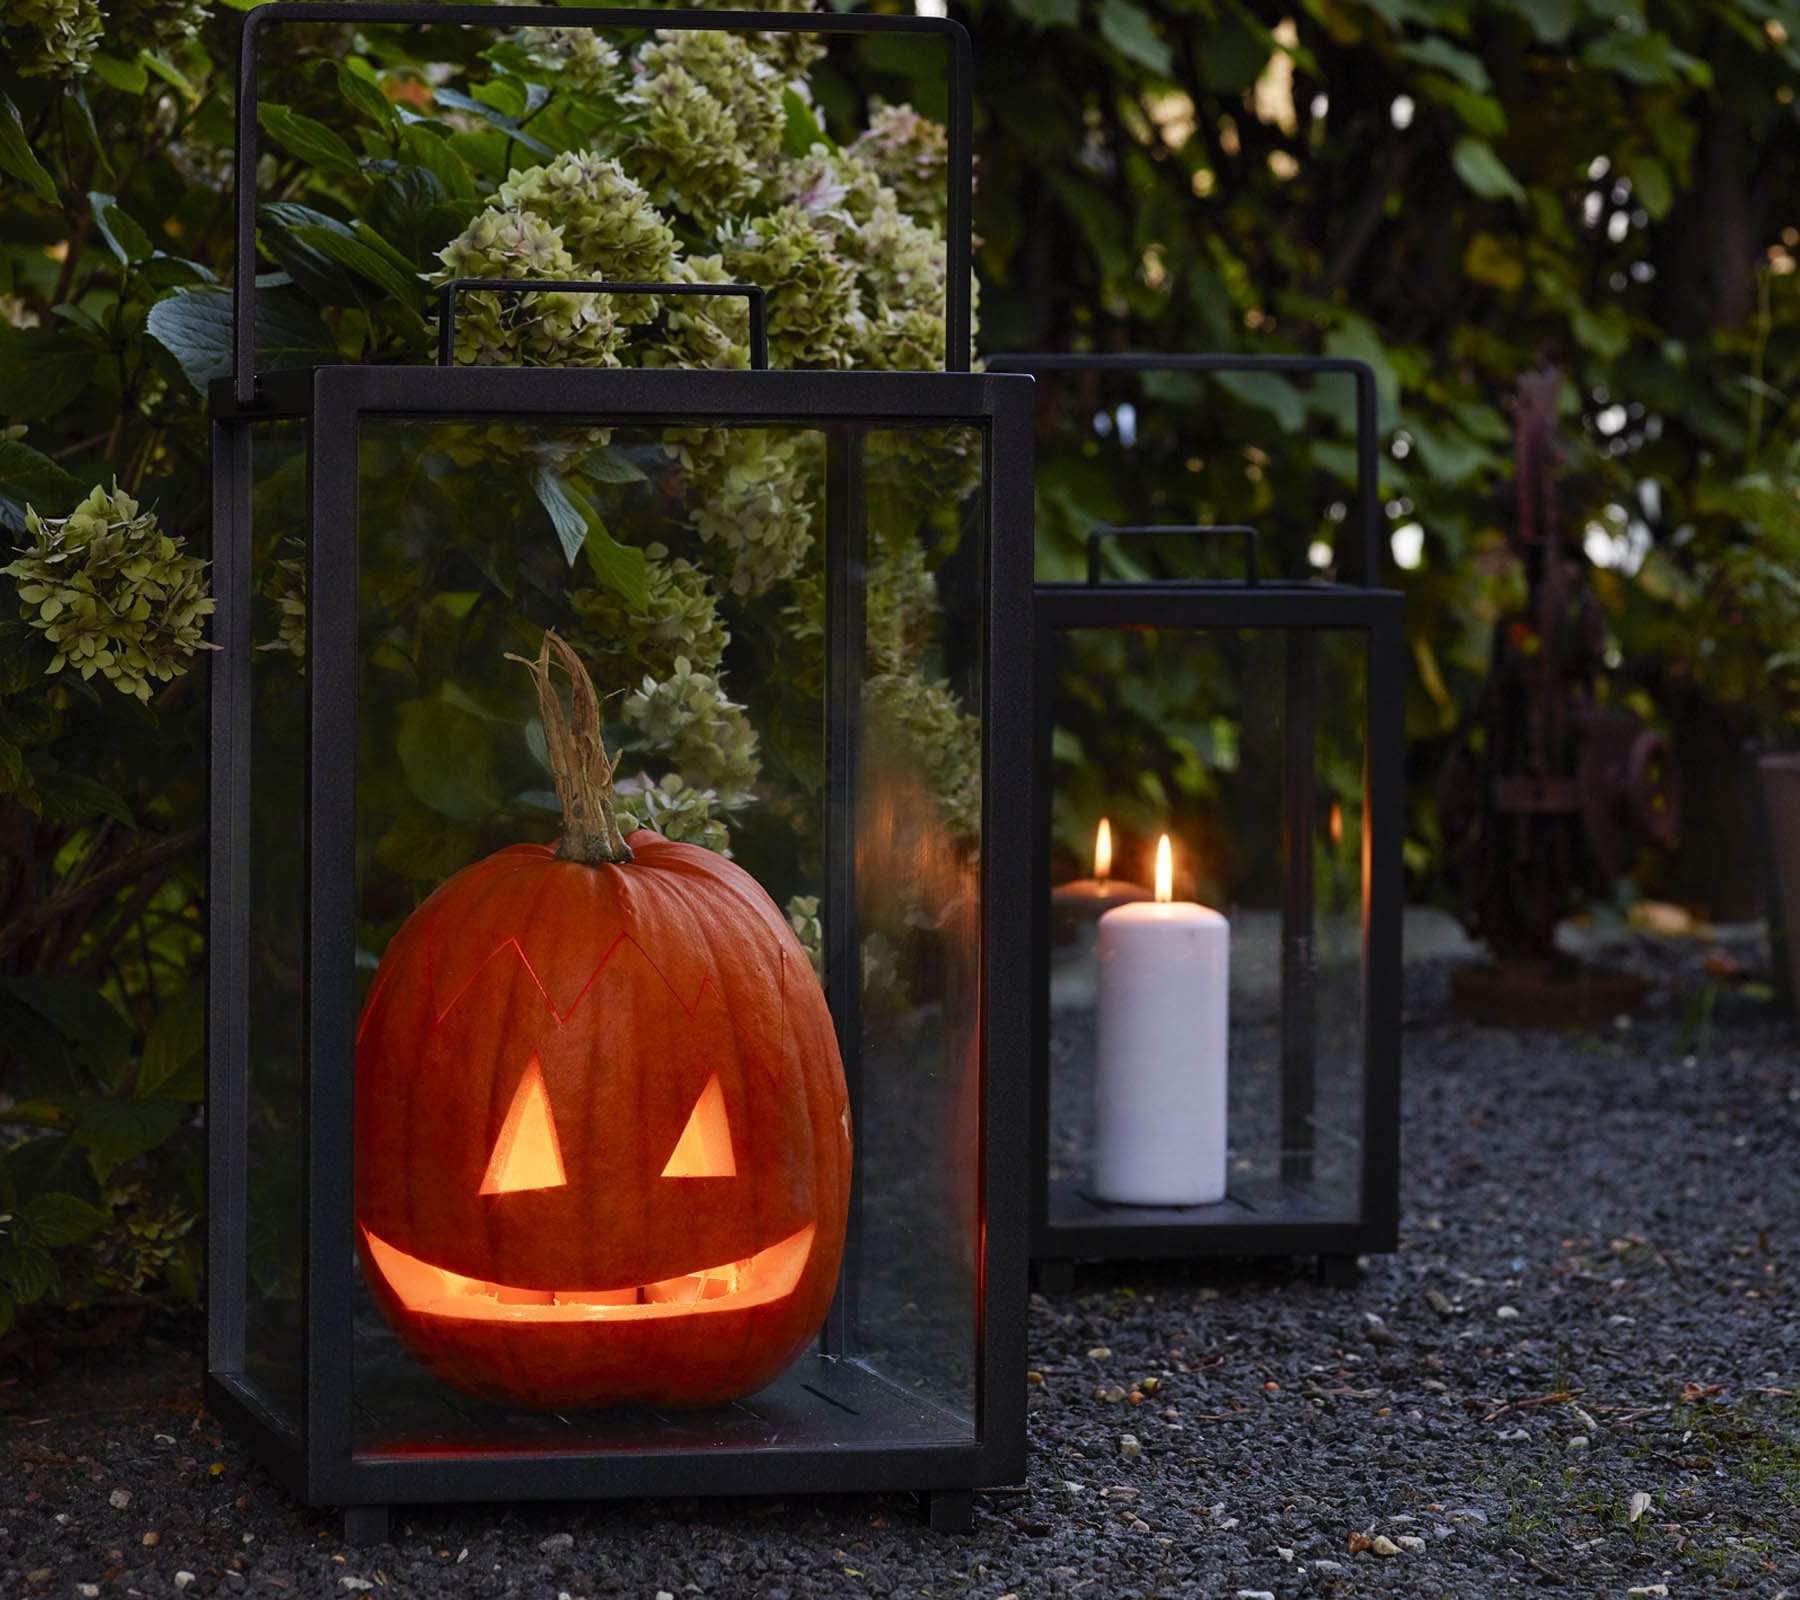 Boxhill's Lighthouse Outdoor Large Aluminum Lantern for Candles | Set of 2 lifestyle image with pumpkin and candle inside beside the plants